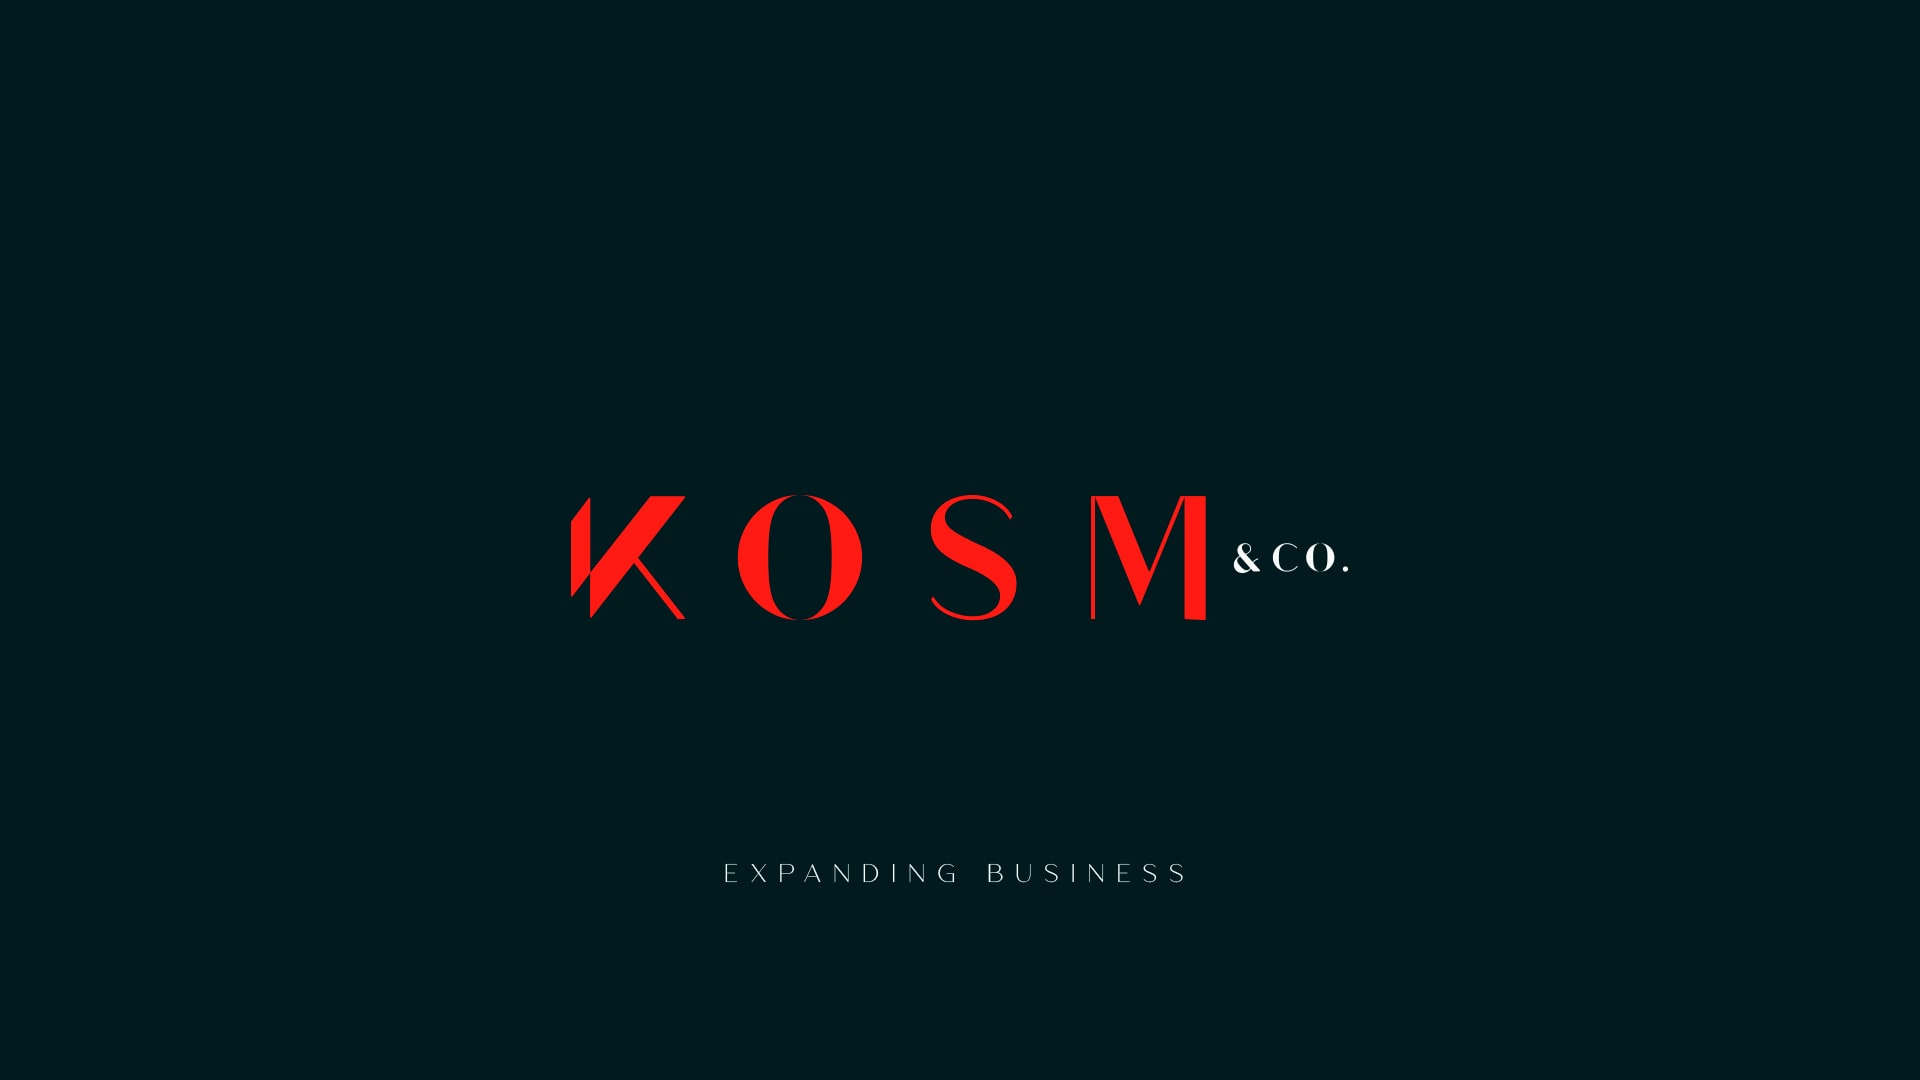 Kosm’s Dynamic Branding for Business Expansion